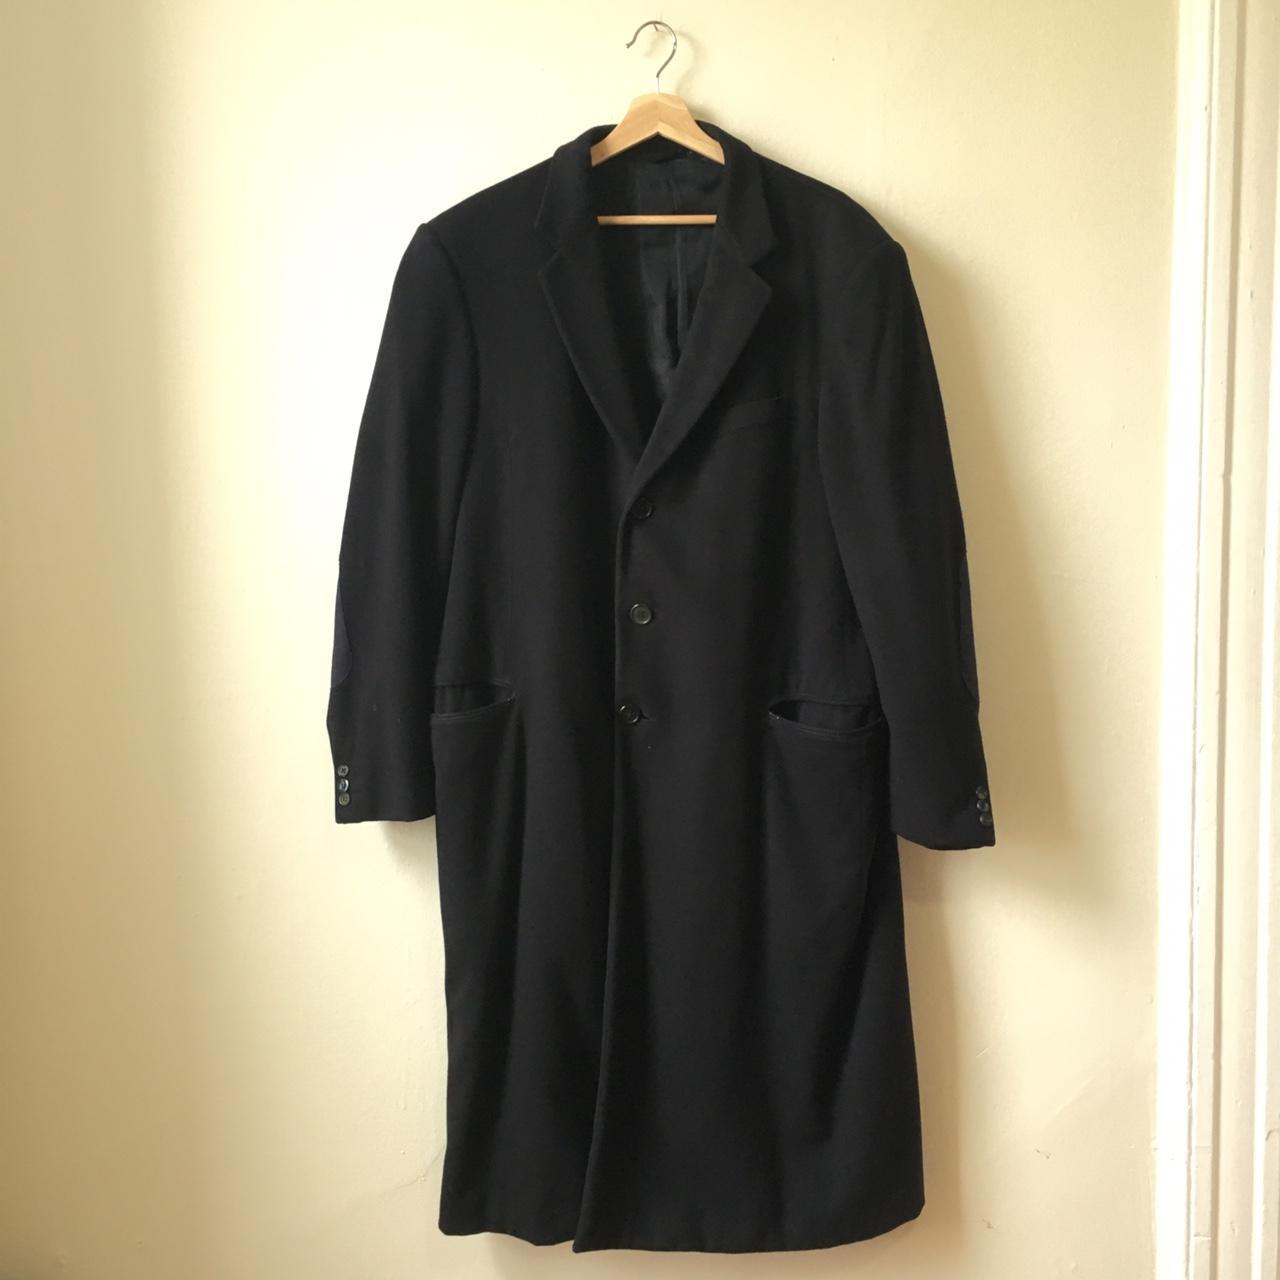 Reworked Vintage Giorgio Armani Wool Trench Coat... - Depop